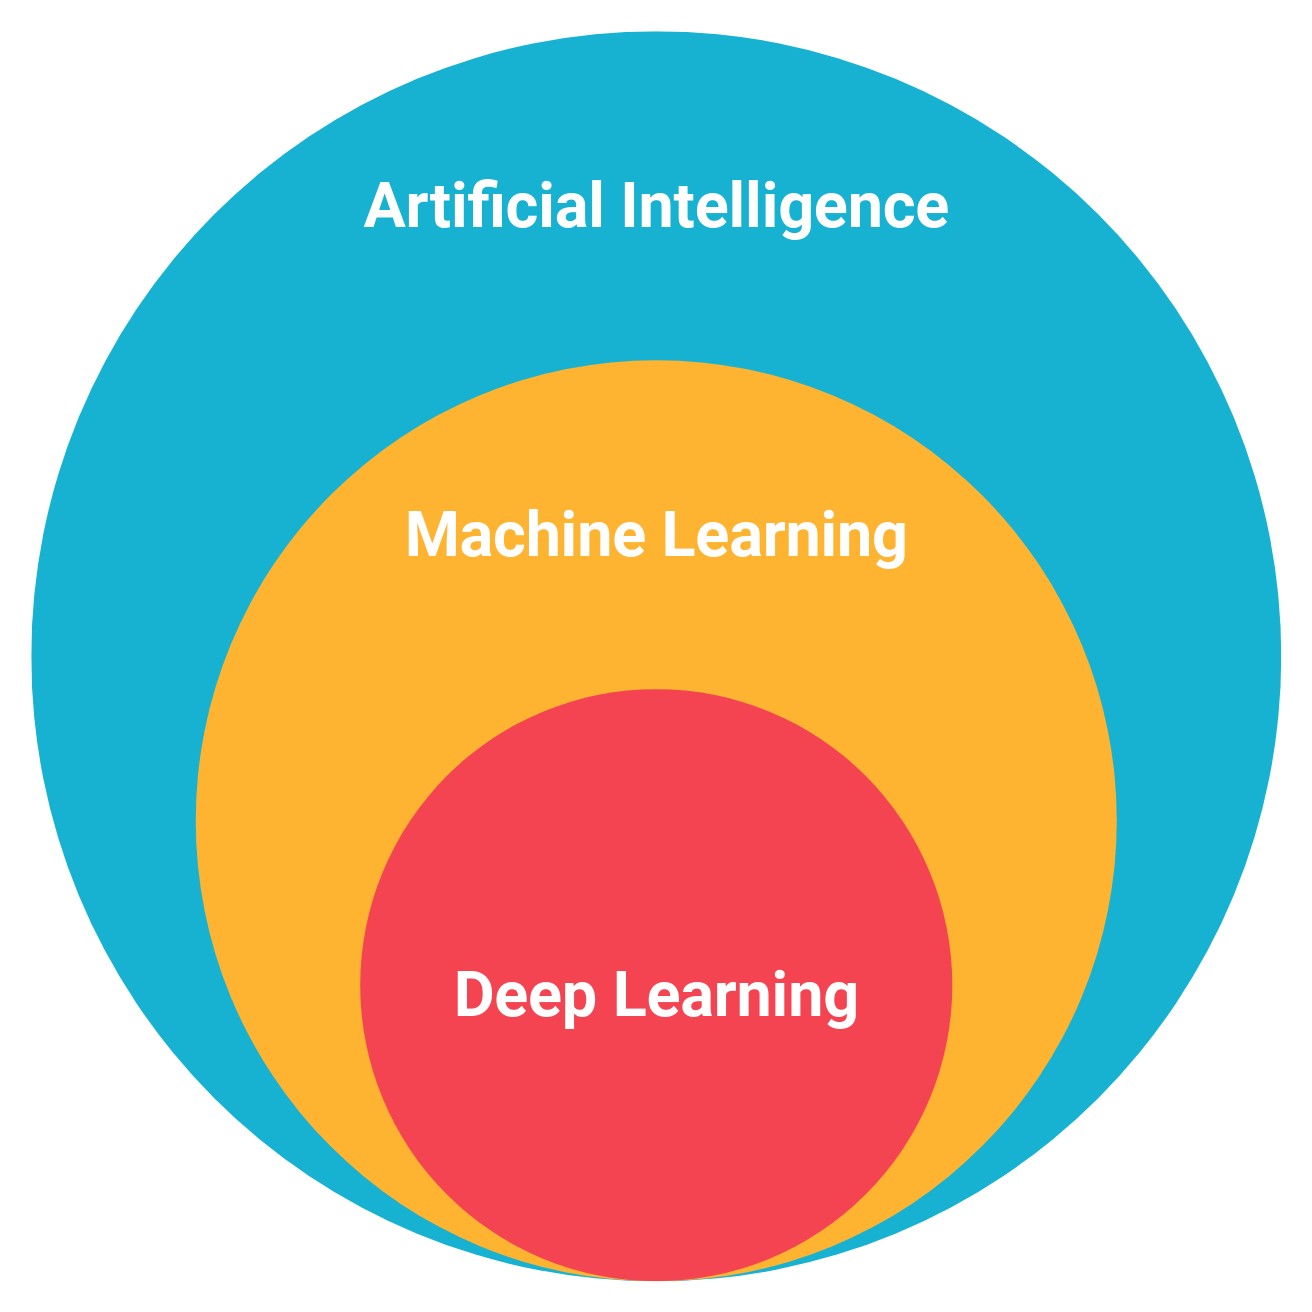 The relationship between AI, machine learning, and deep learning